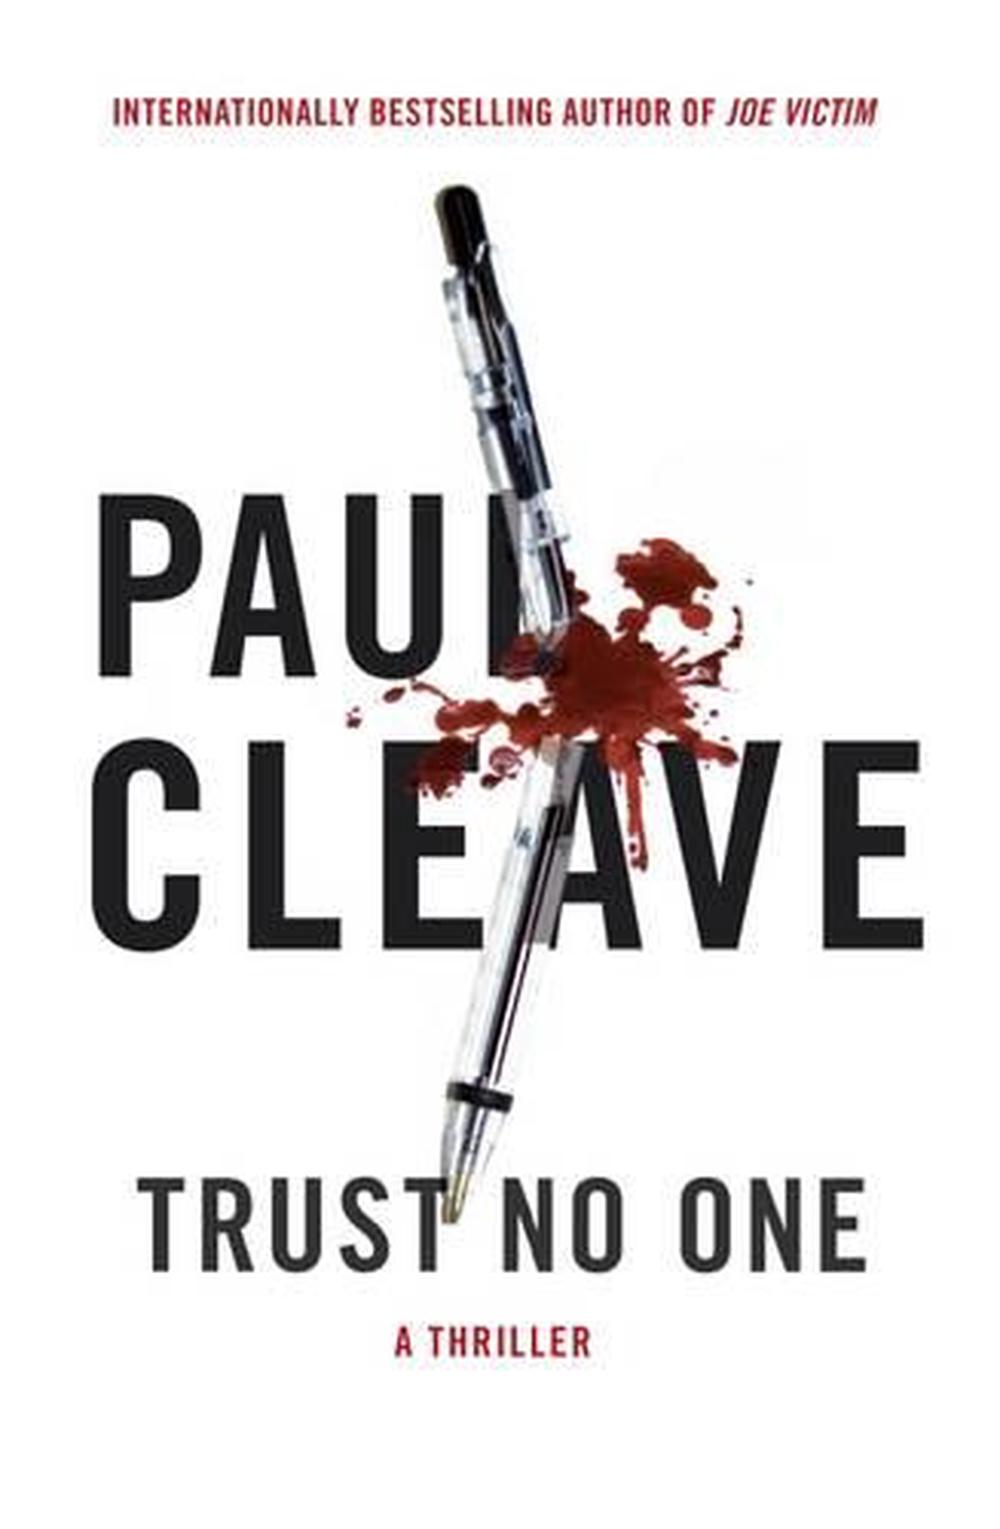 online　Buy　Trust　9781927262641　Paperback,　Paul,　at　by　One　No　Nile　Cleave　The